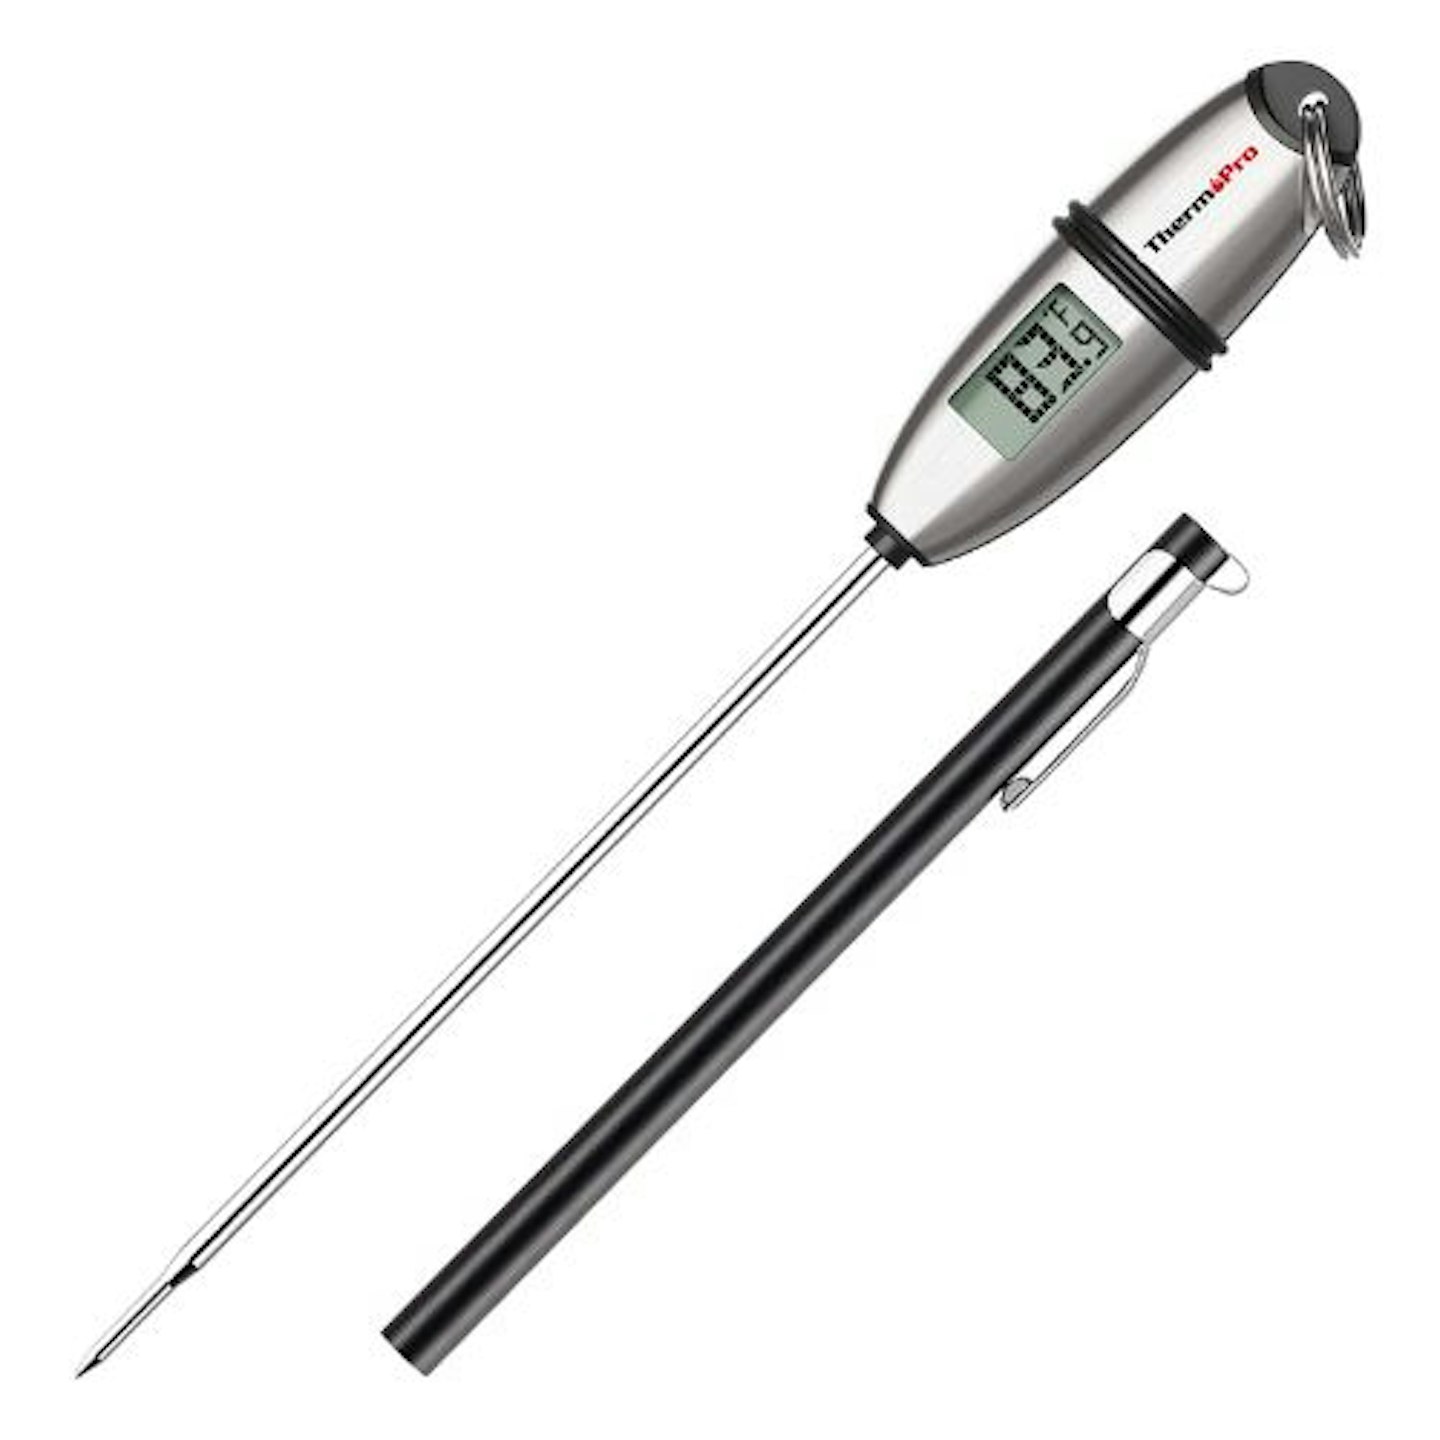 ThermoPro, TP02S Digital Thermometer